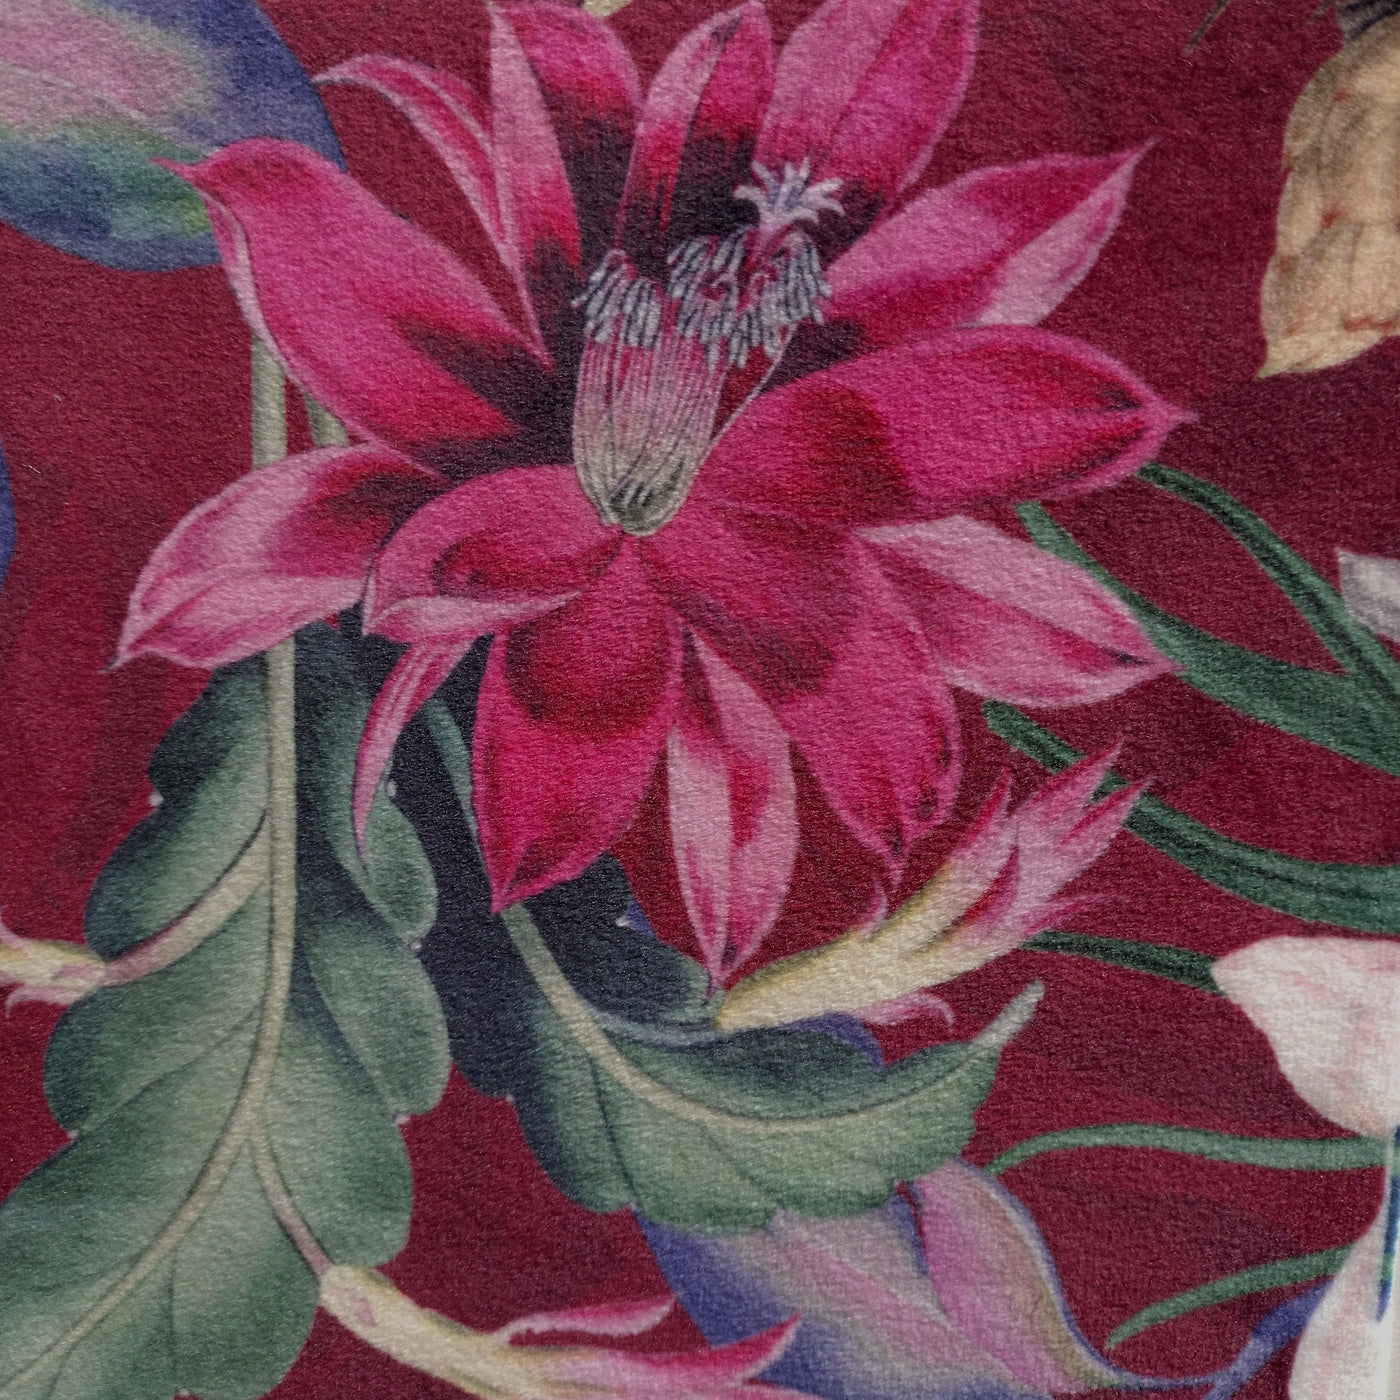 close up of Luxury Blossoms Velvet Cushion in Burgundy Red with Hot Pink Piping, used for the velvet cushion